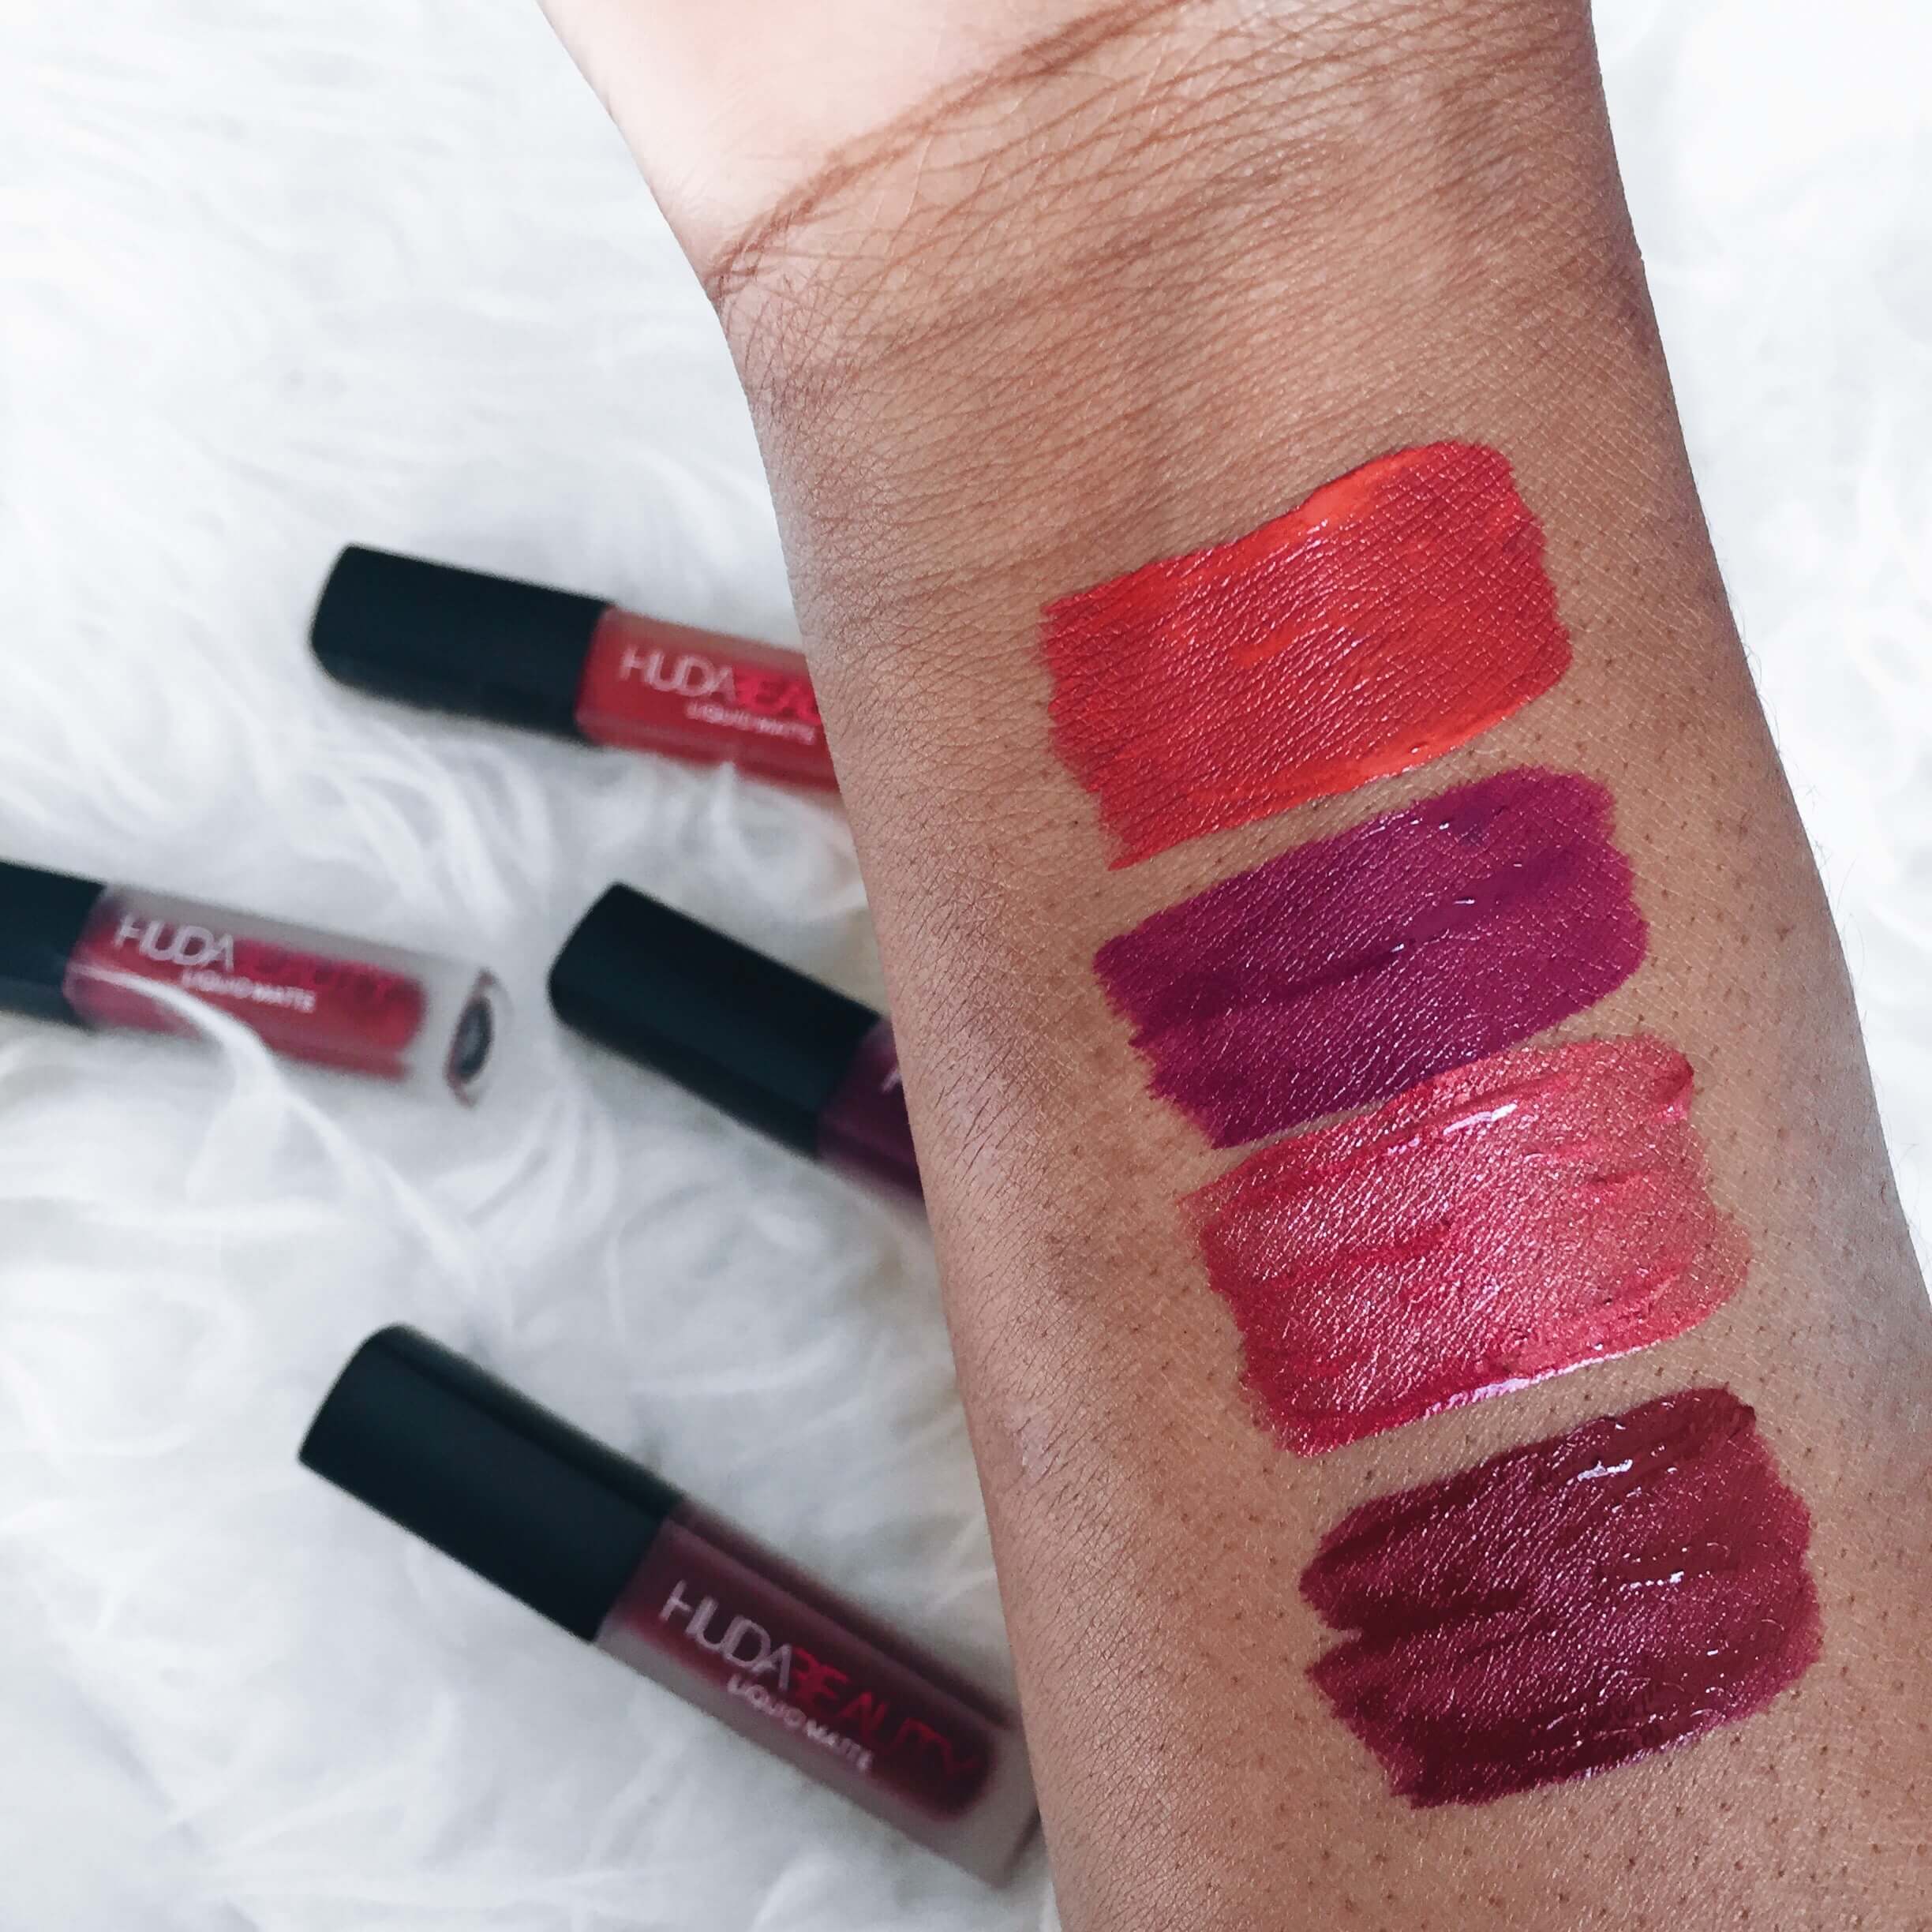 huda beauty liquid lipsticks review and swatches